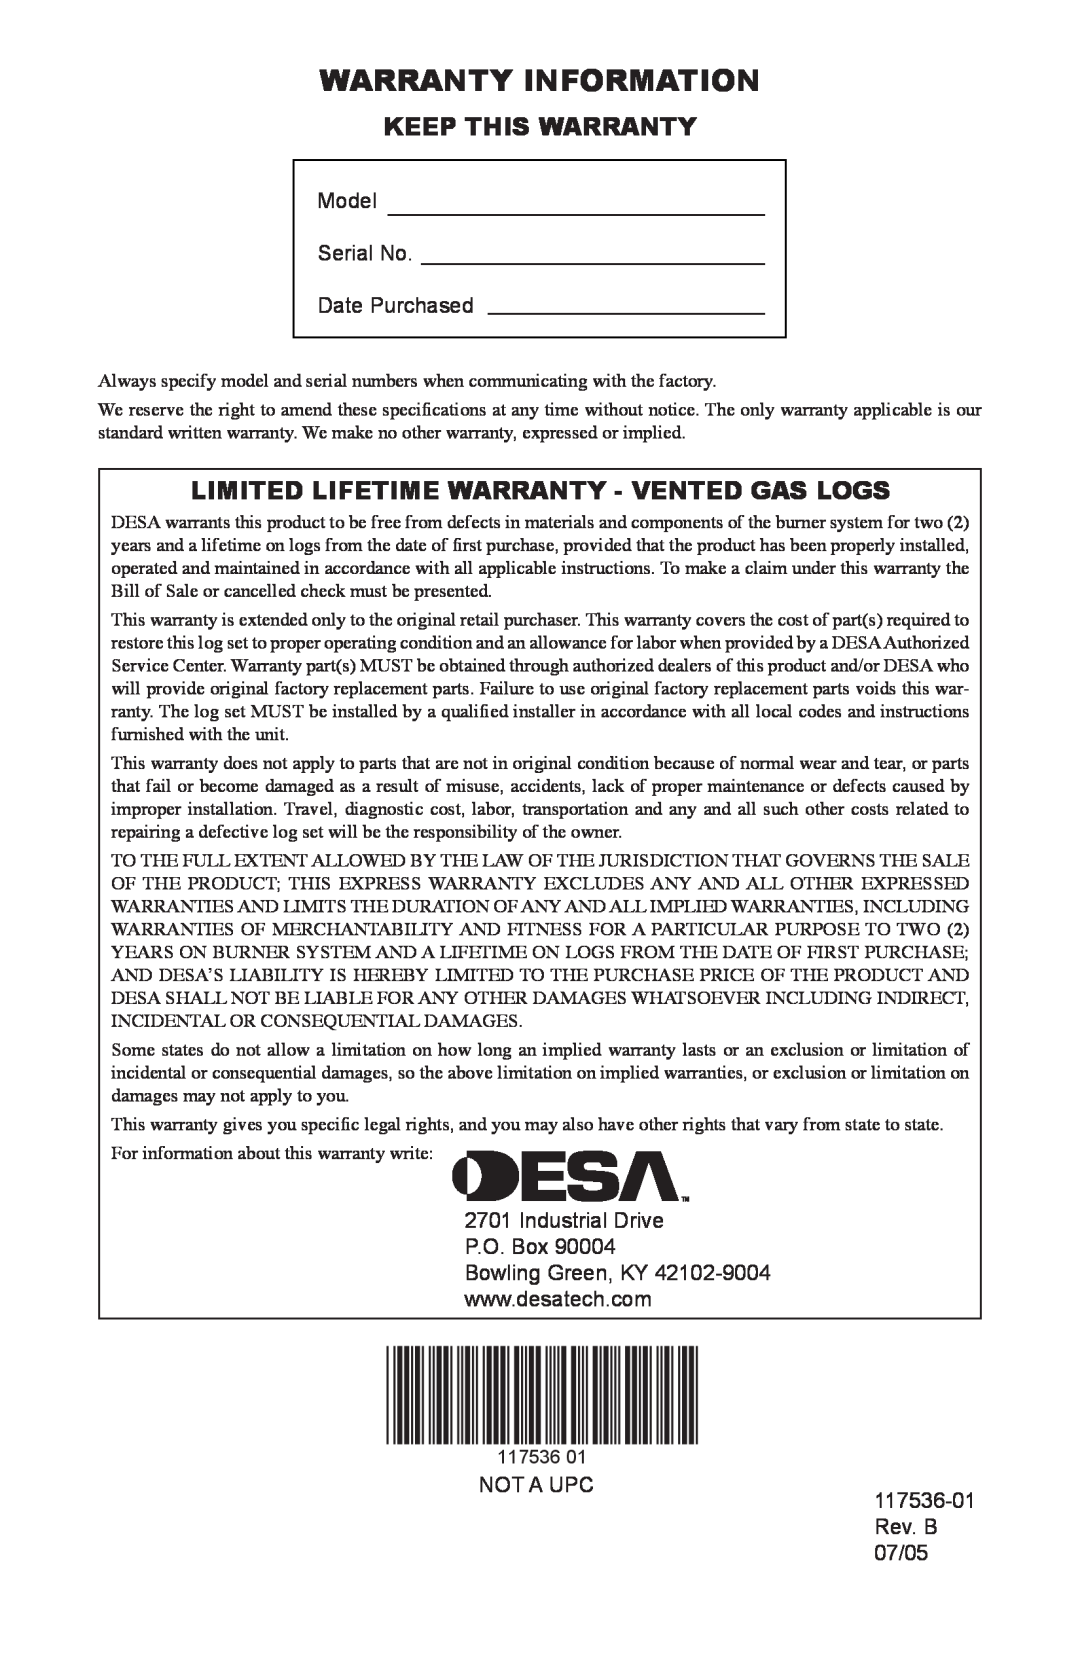 Desa SMS18, SMS24 installation manual Warranty Information, Keep This Warranty, Limited Lifetime Warranty - Vented Gas Logs 